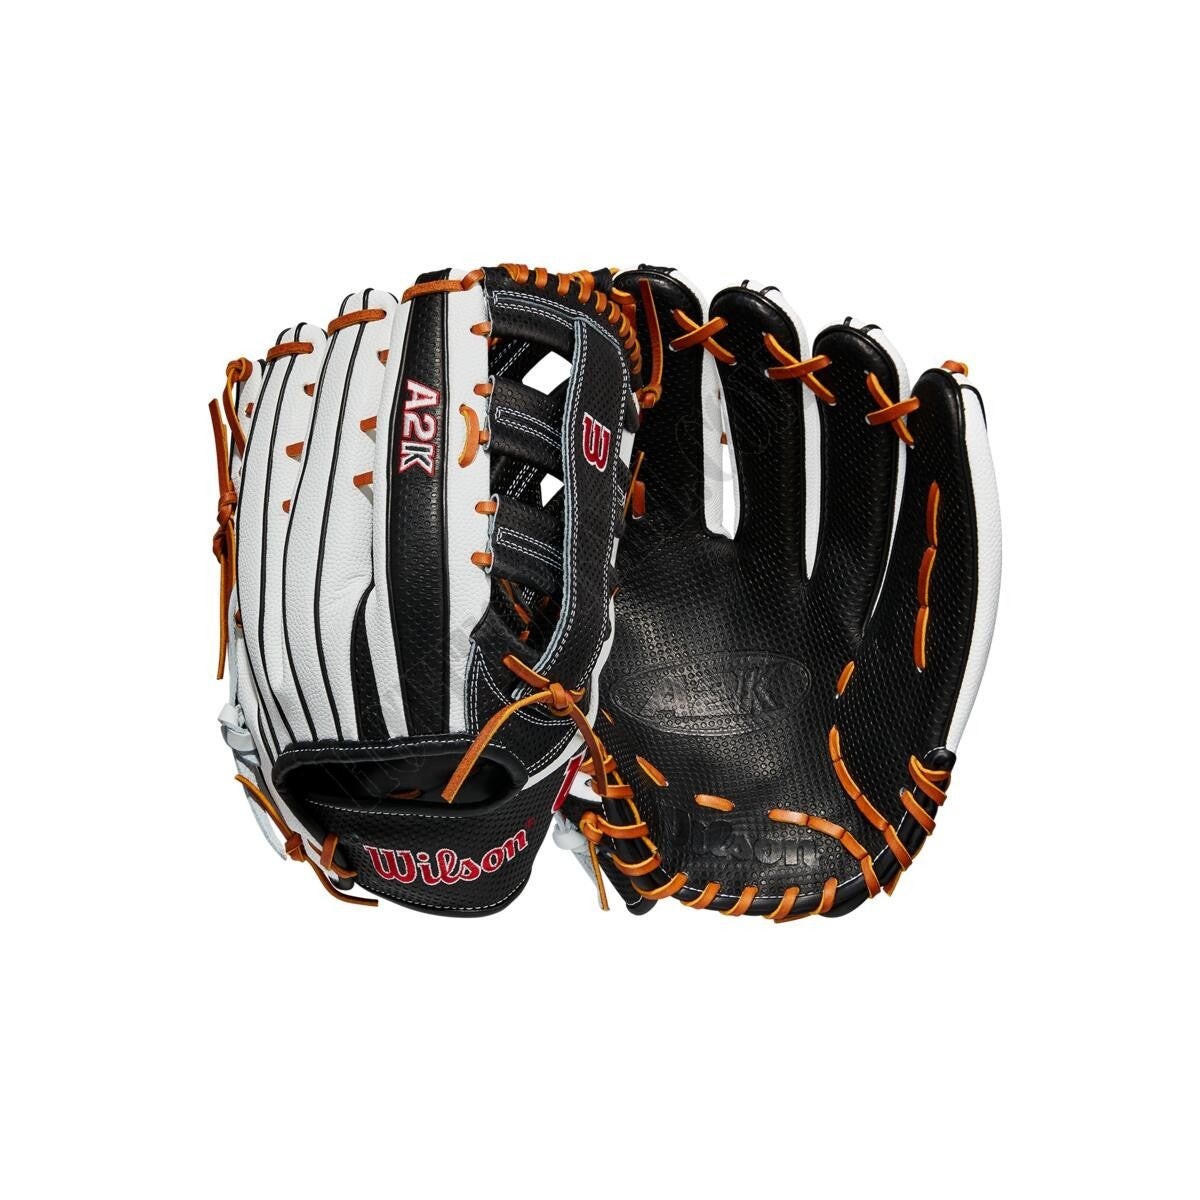 2021 A2K SC1775SS 12.75" Outfield Baseball Glove - Limited Edition ● Wilson Promotions - 2021 A2K SC1775SS 12.75" Outfield Baseball Glove - Limited Edition ● Wilson Promotions